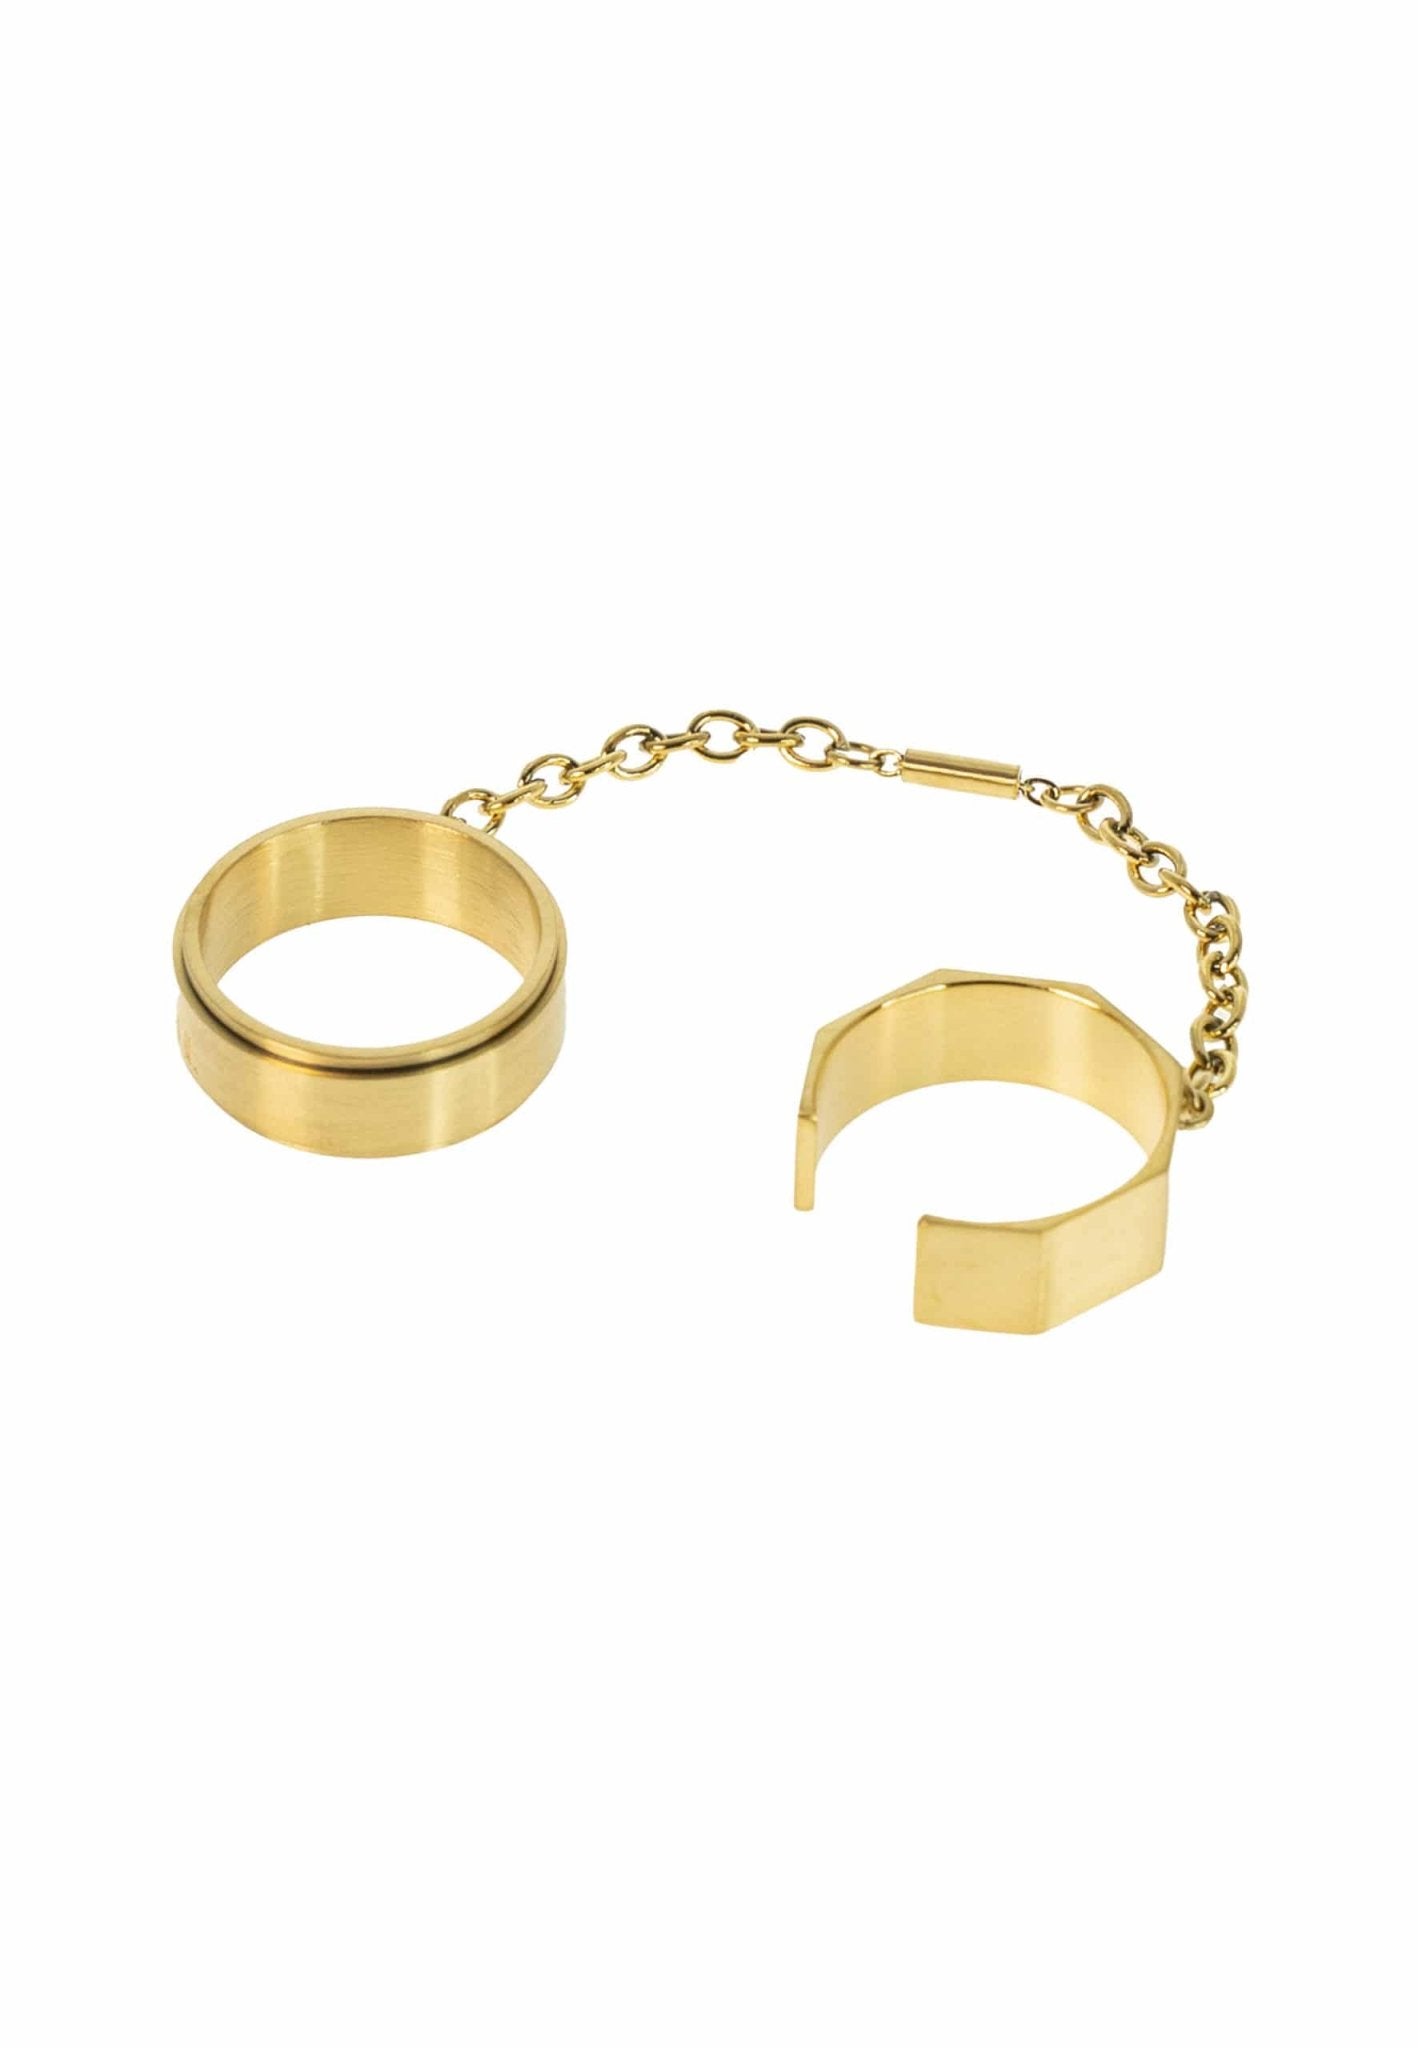 Two Finger Ring with Chain "Twogether" - MYL BERLIN - 4260654111569 - 4260654111569